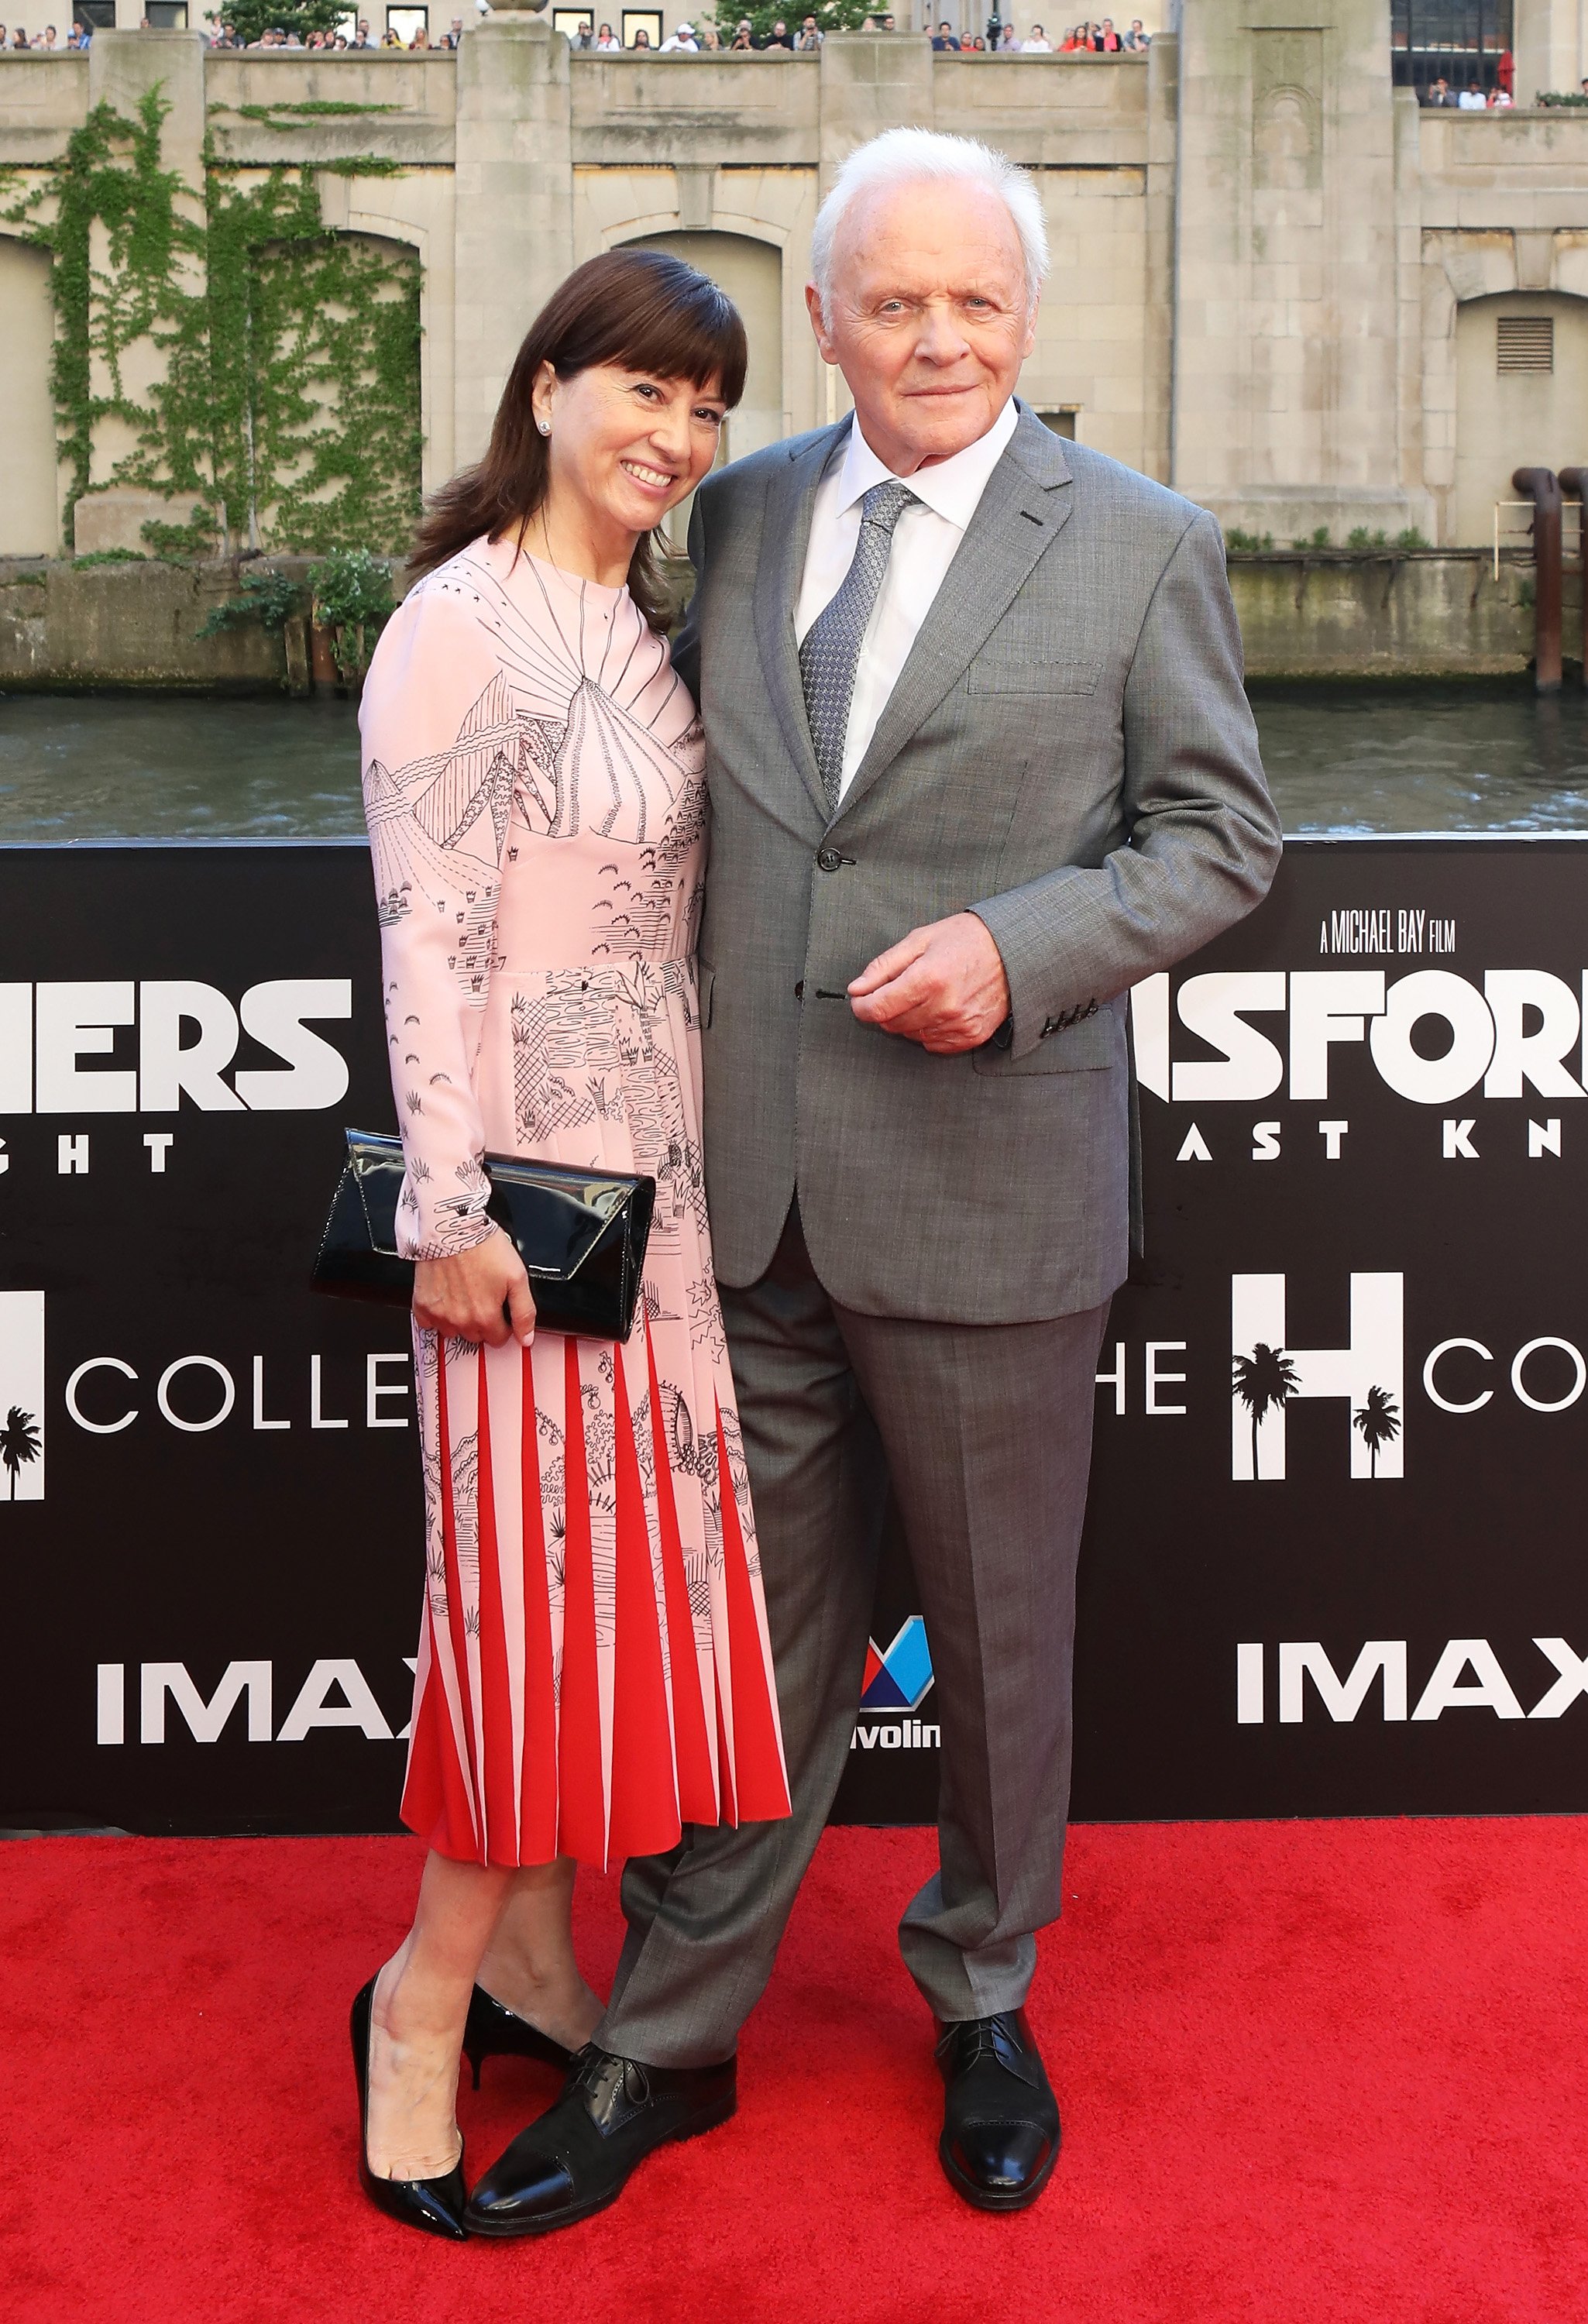 Anthony Hopkins and his wife Stella Arroyave attend the premiere of "Transformers: The Last Knight" on June 20, 2017, in Chicago, Illinois. | Source: Getty Images